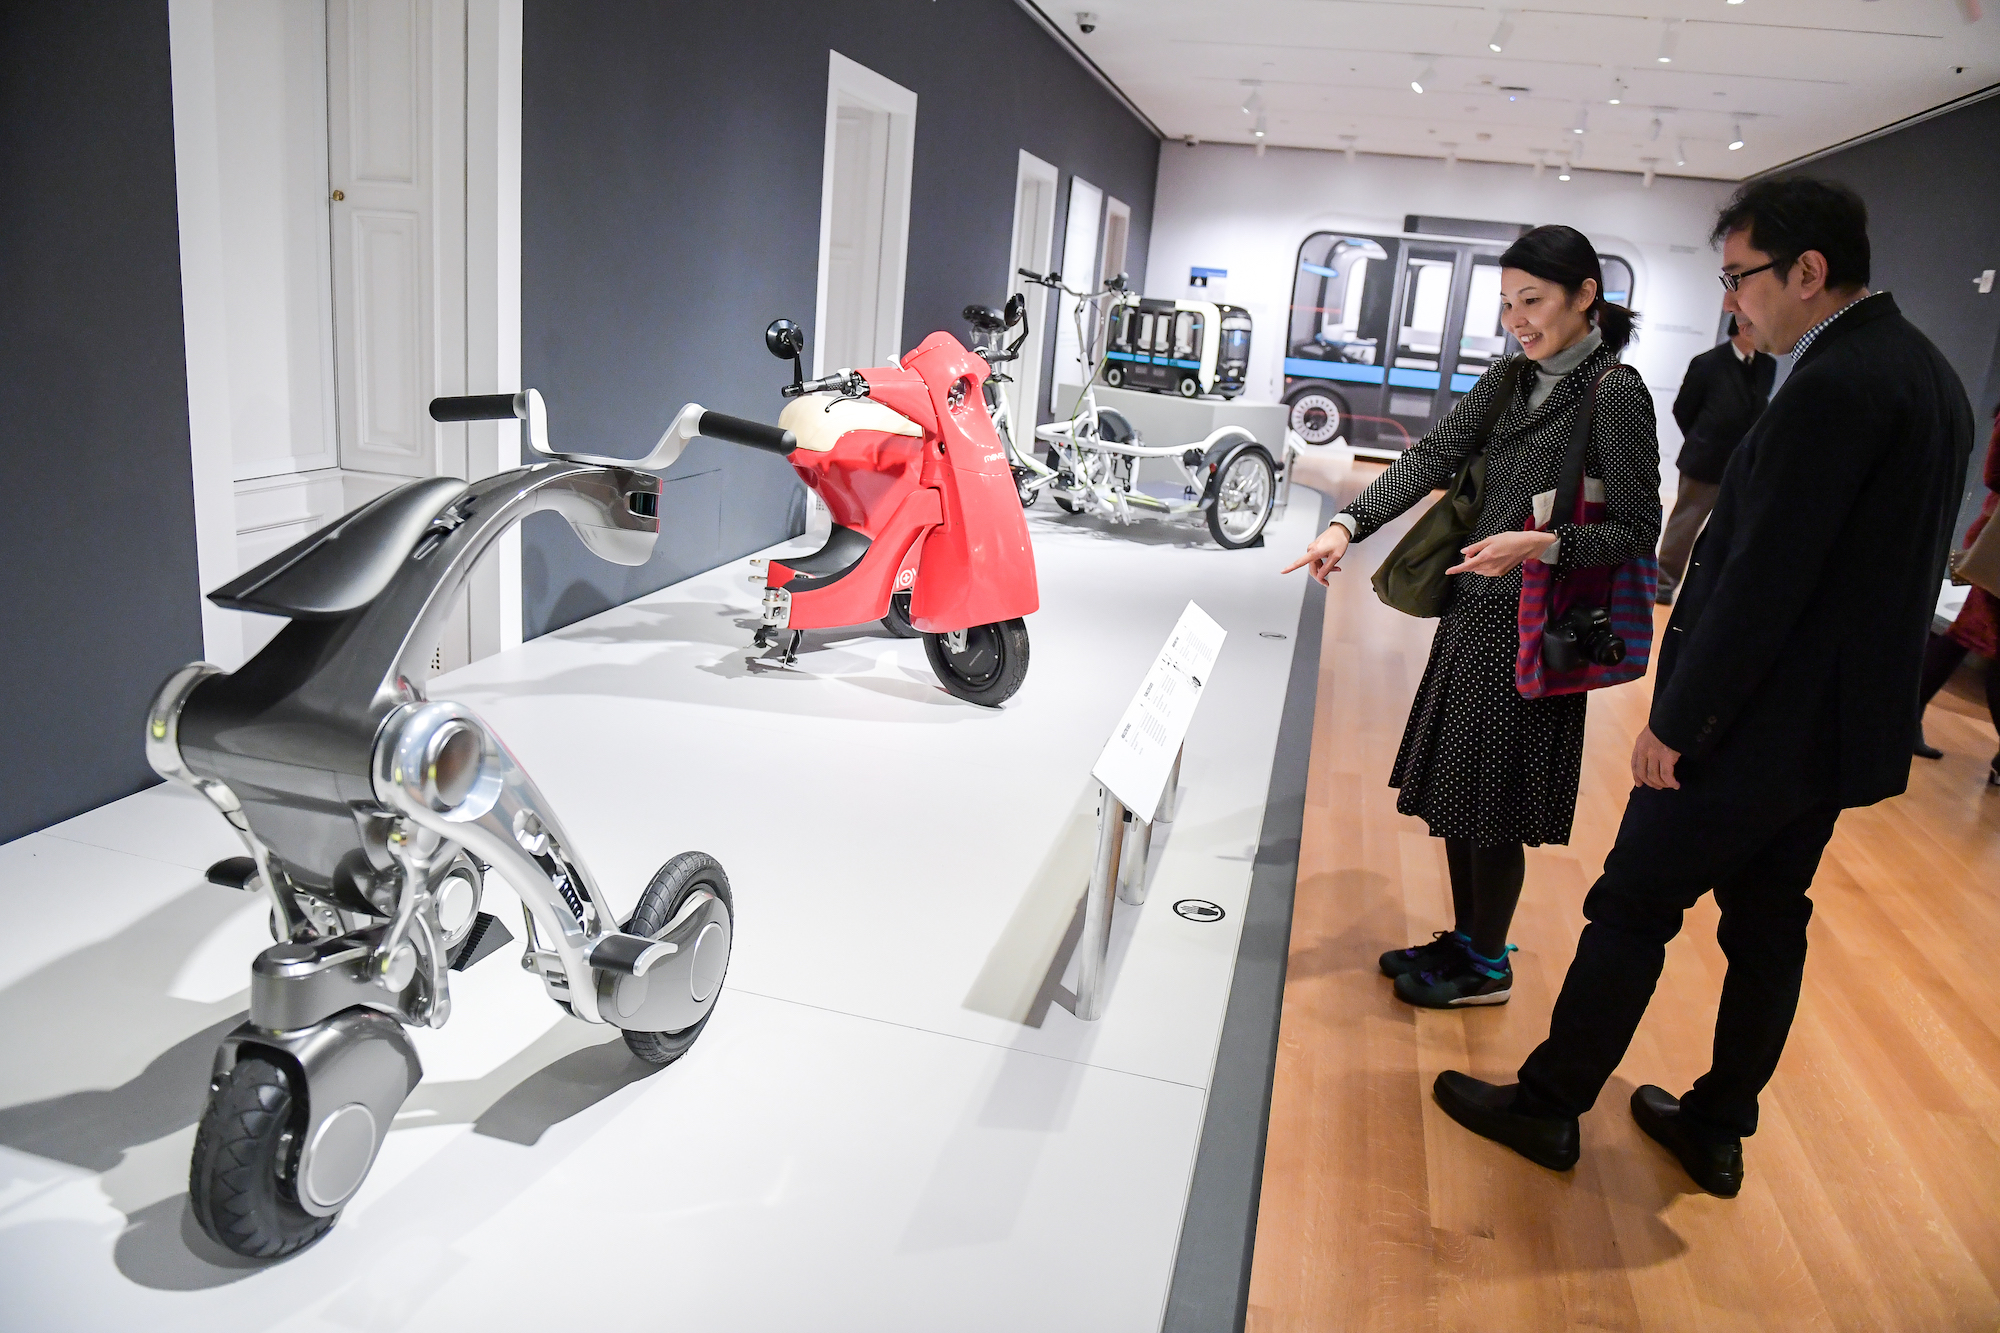 A woman in a gallery points to a futuristic, chrome-colored scooter, which is on display alongside a folded red scooter, a large bike, and a vehicle that looks like a small bus.